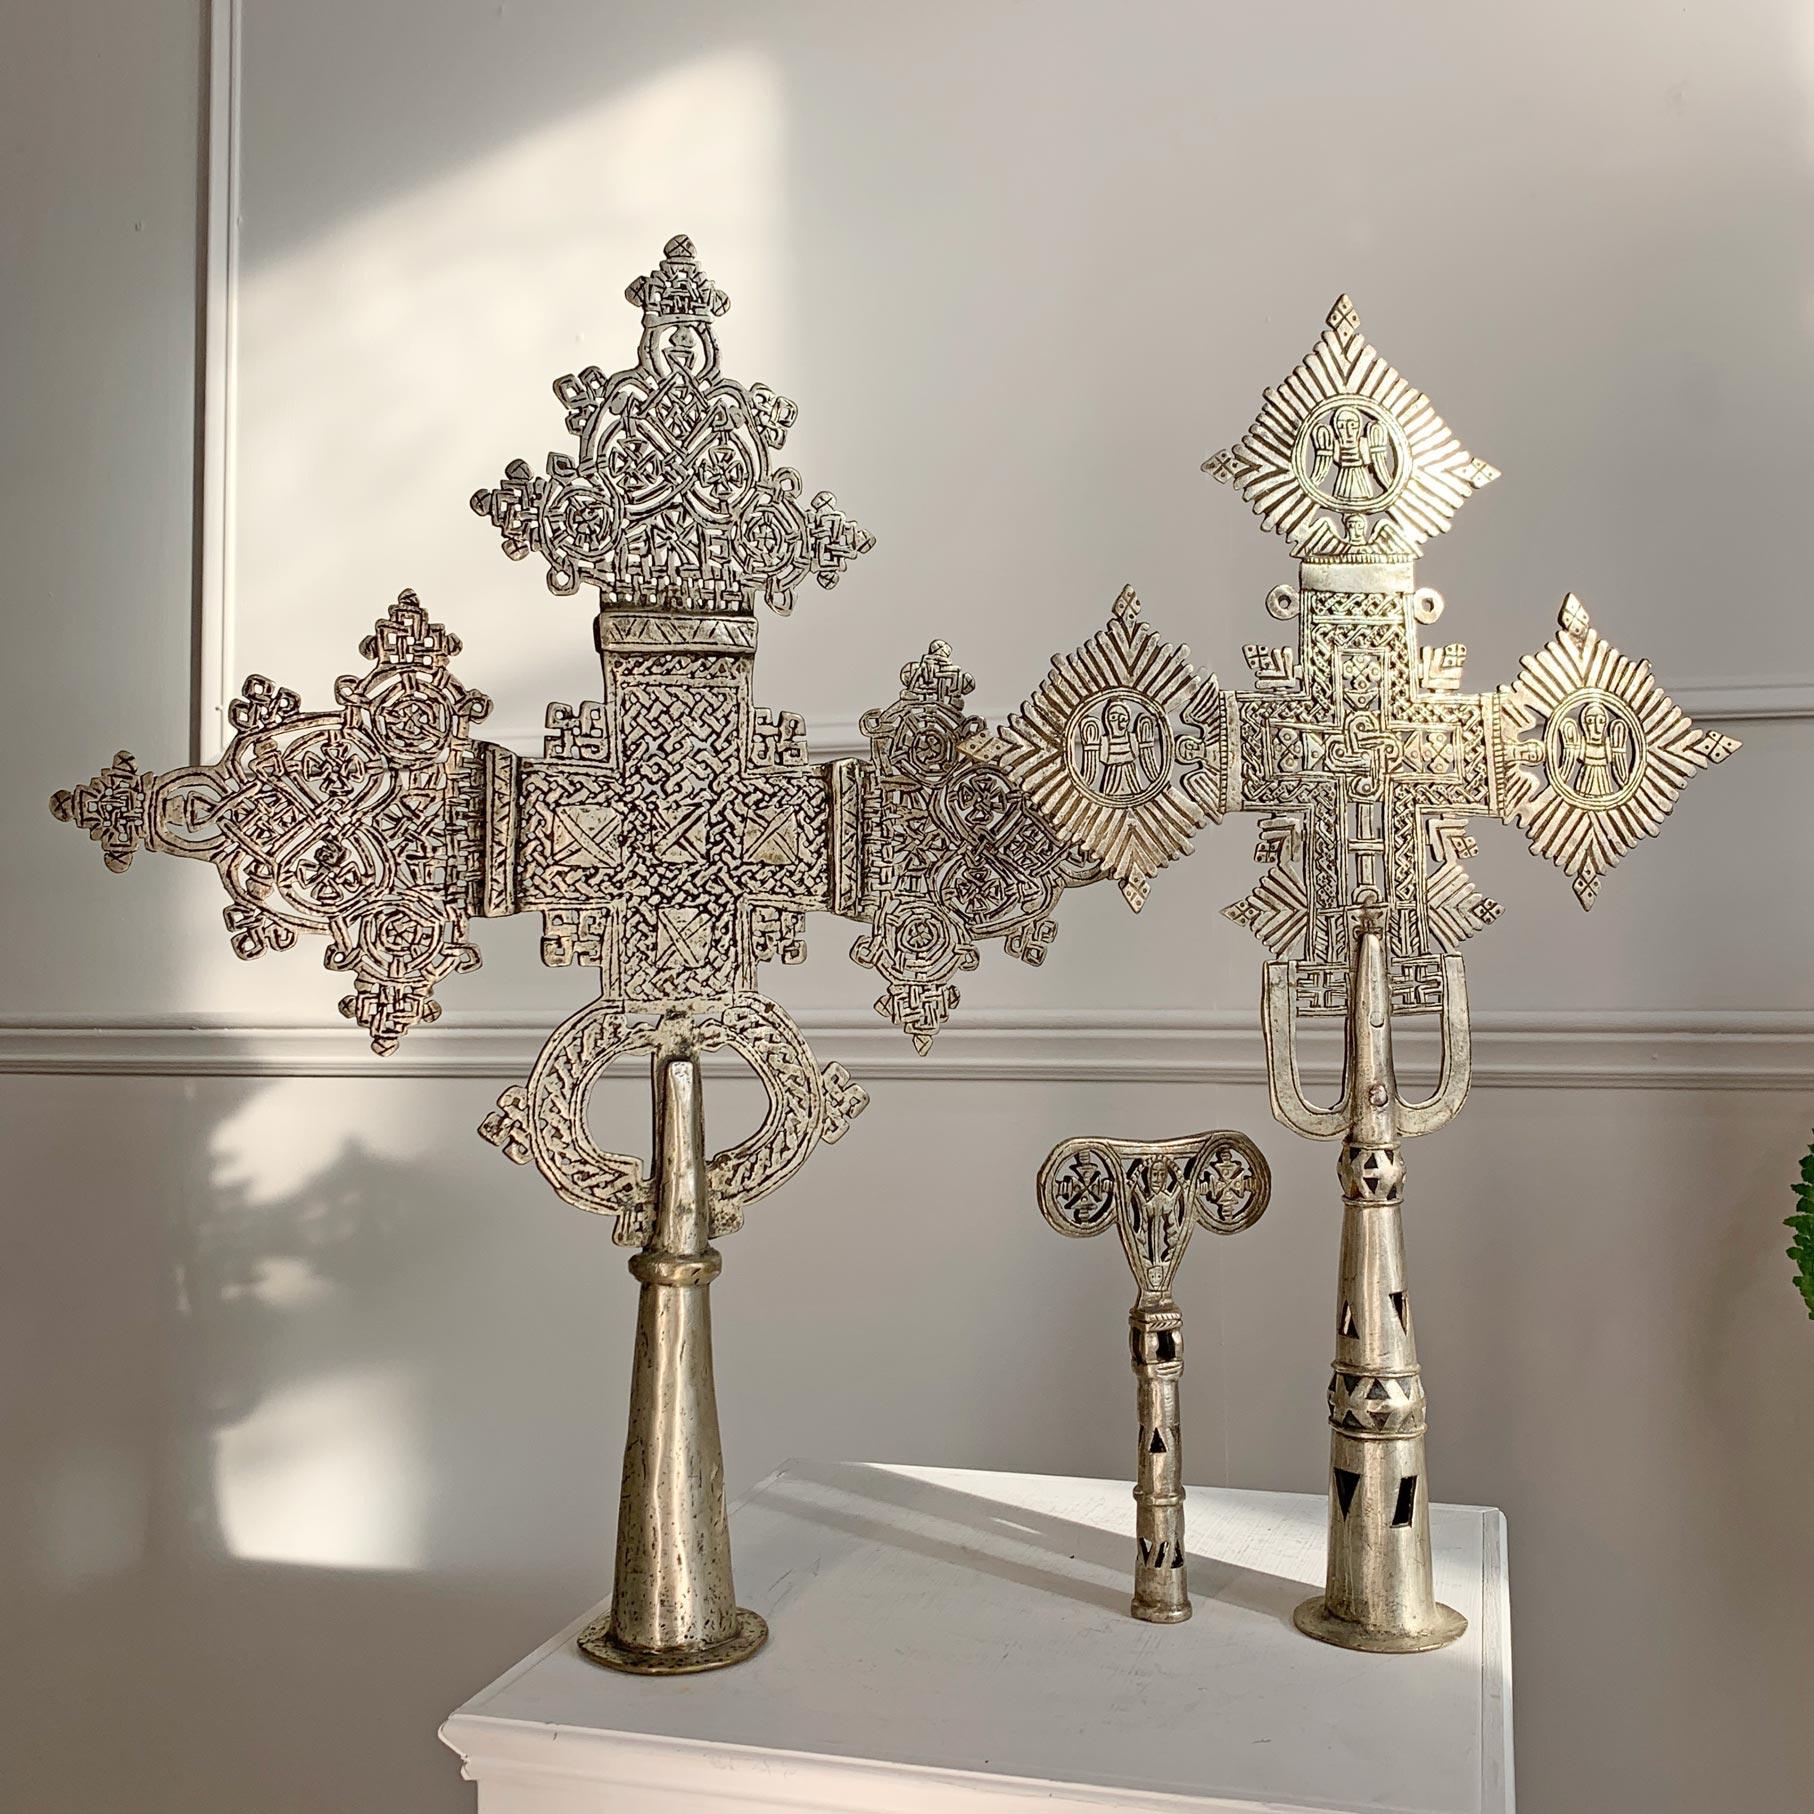 An exceptional set of 3 hand crafted Abyssinian Processional Crosses, dating to the late 19th/early 20th century, heavy pieces, finished in silver plate. 



Three types of crosses were made in Ethiopia: those worn around the neck, those intended to